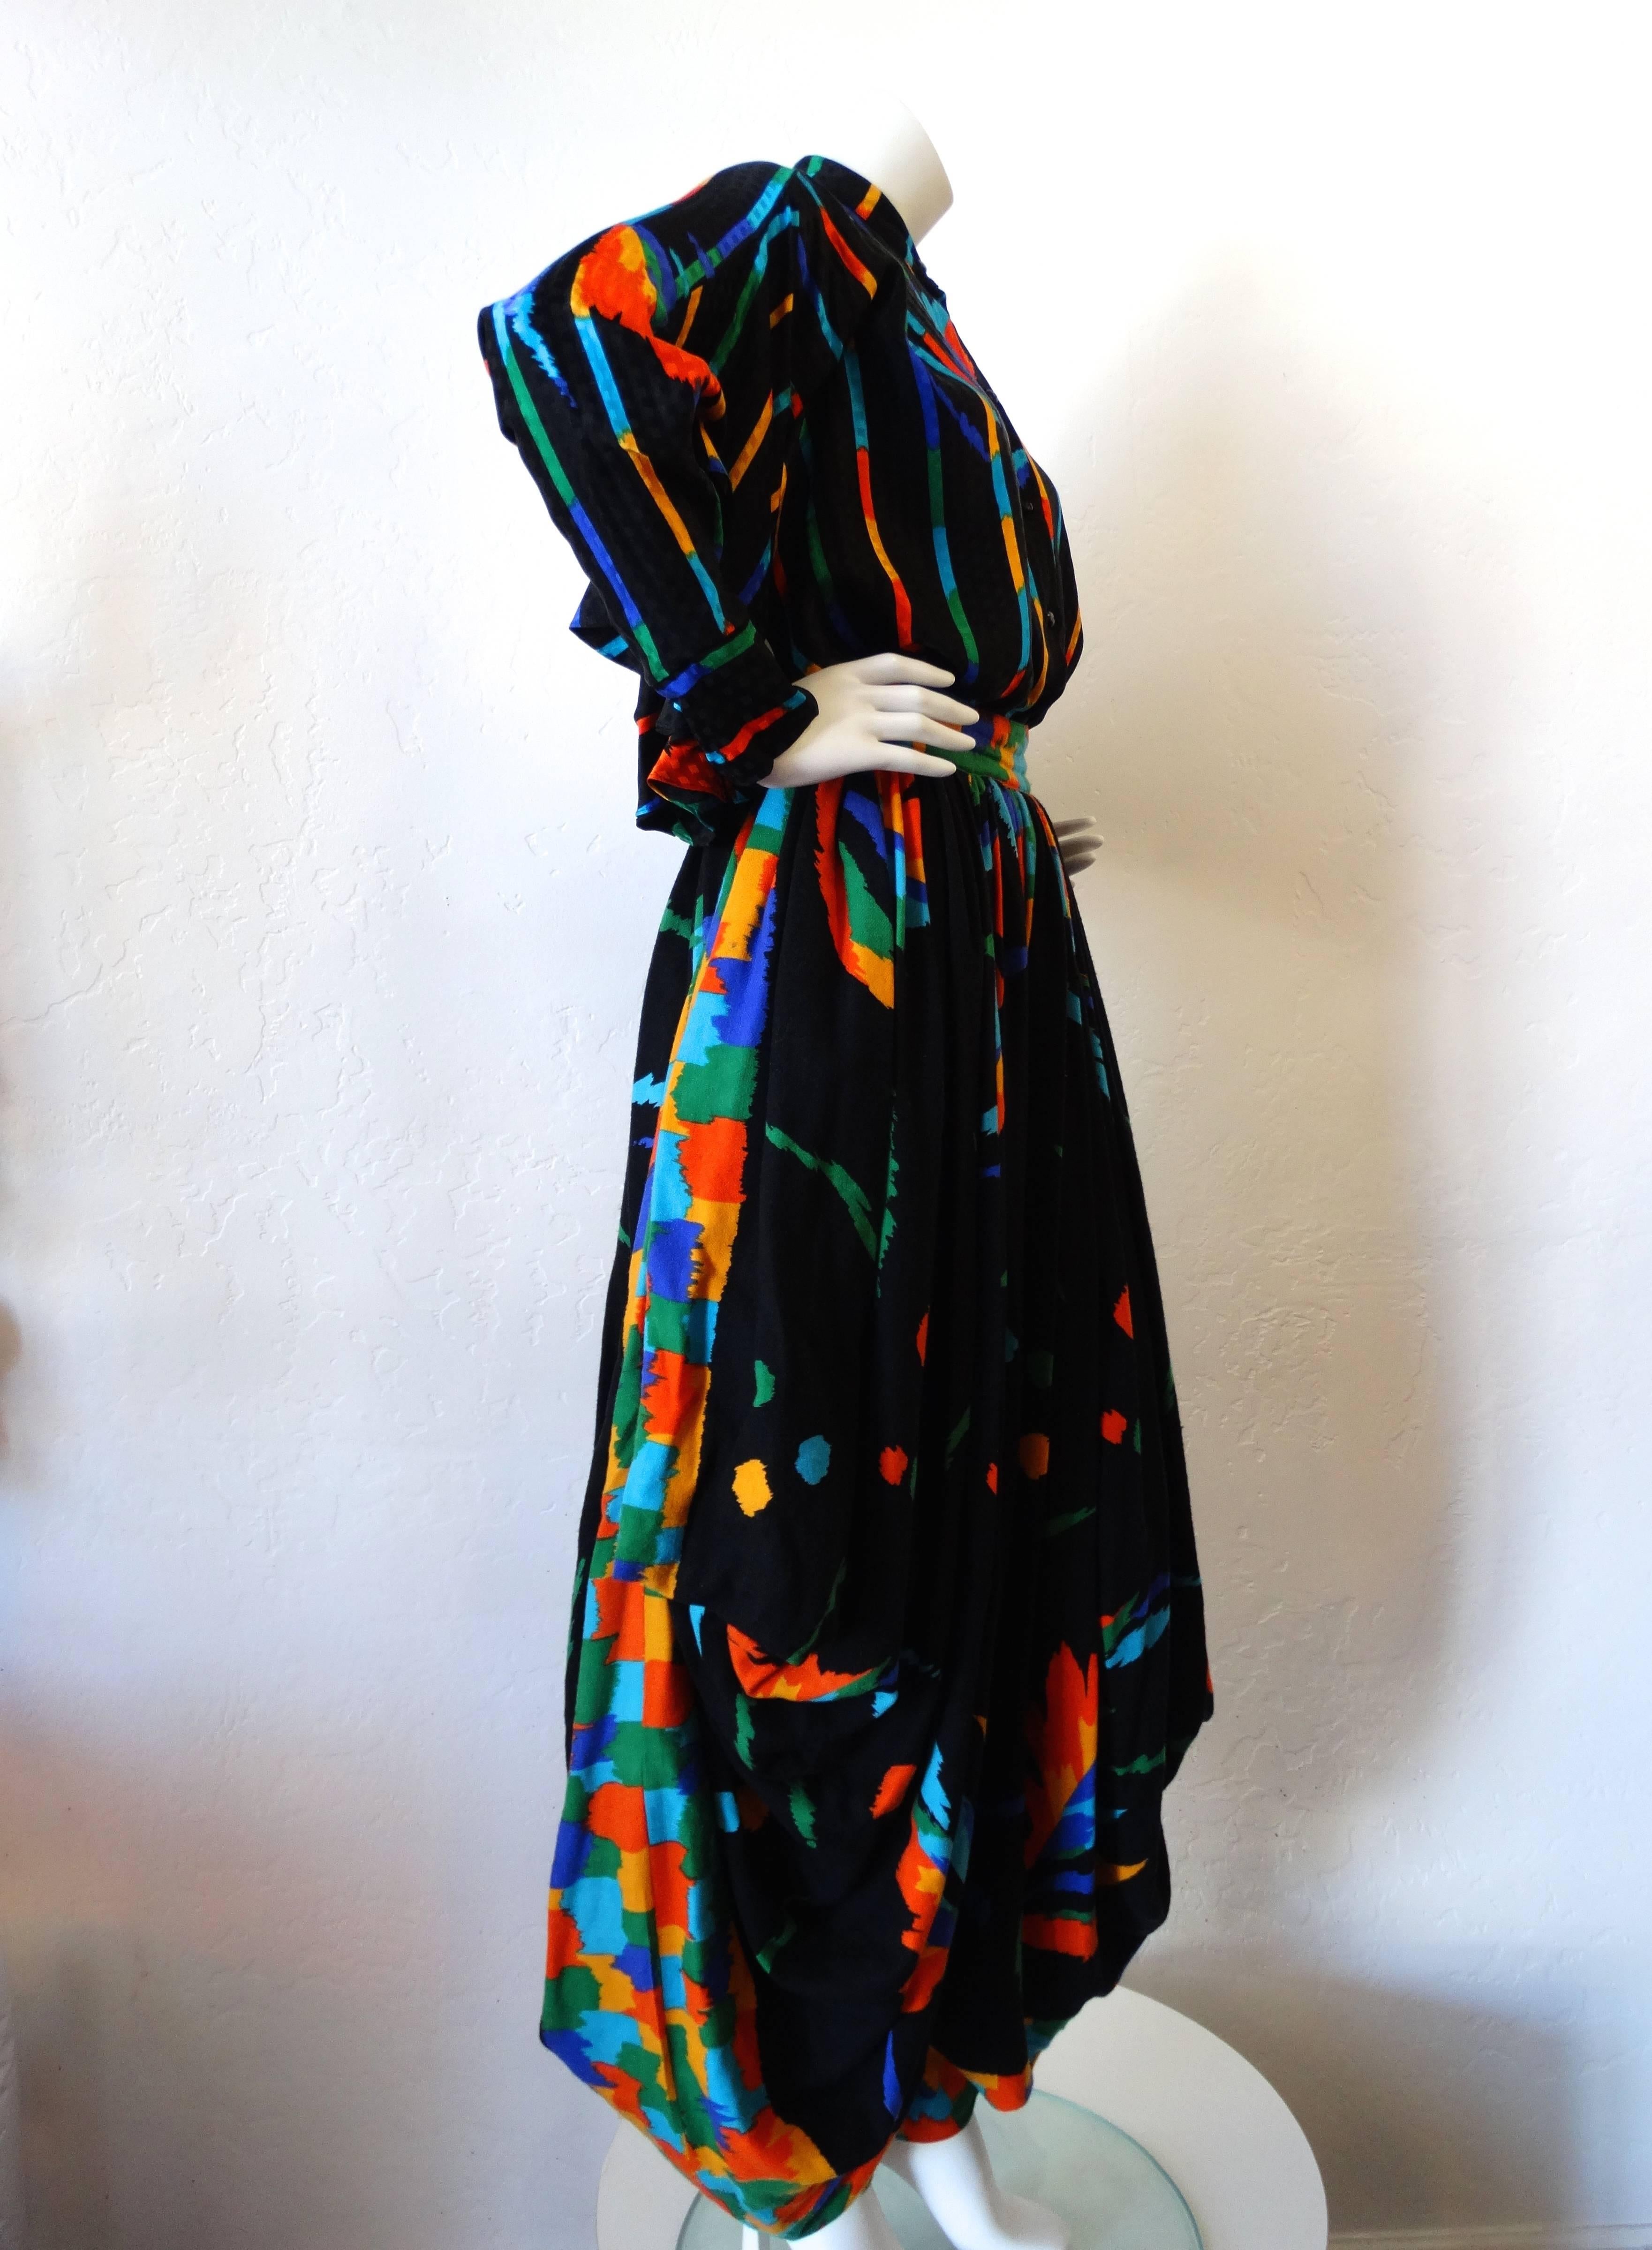 Incredibly rare set from Amsterdam designer Fong Leng! Black and rainbow print featuring stripes, feather motifs and brush strokes. Top buttons up the front- features a high neckline and dramatic fluttering sleeves. Pants sit high waisted, with